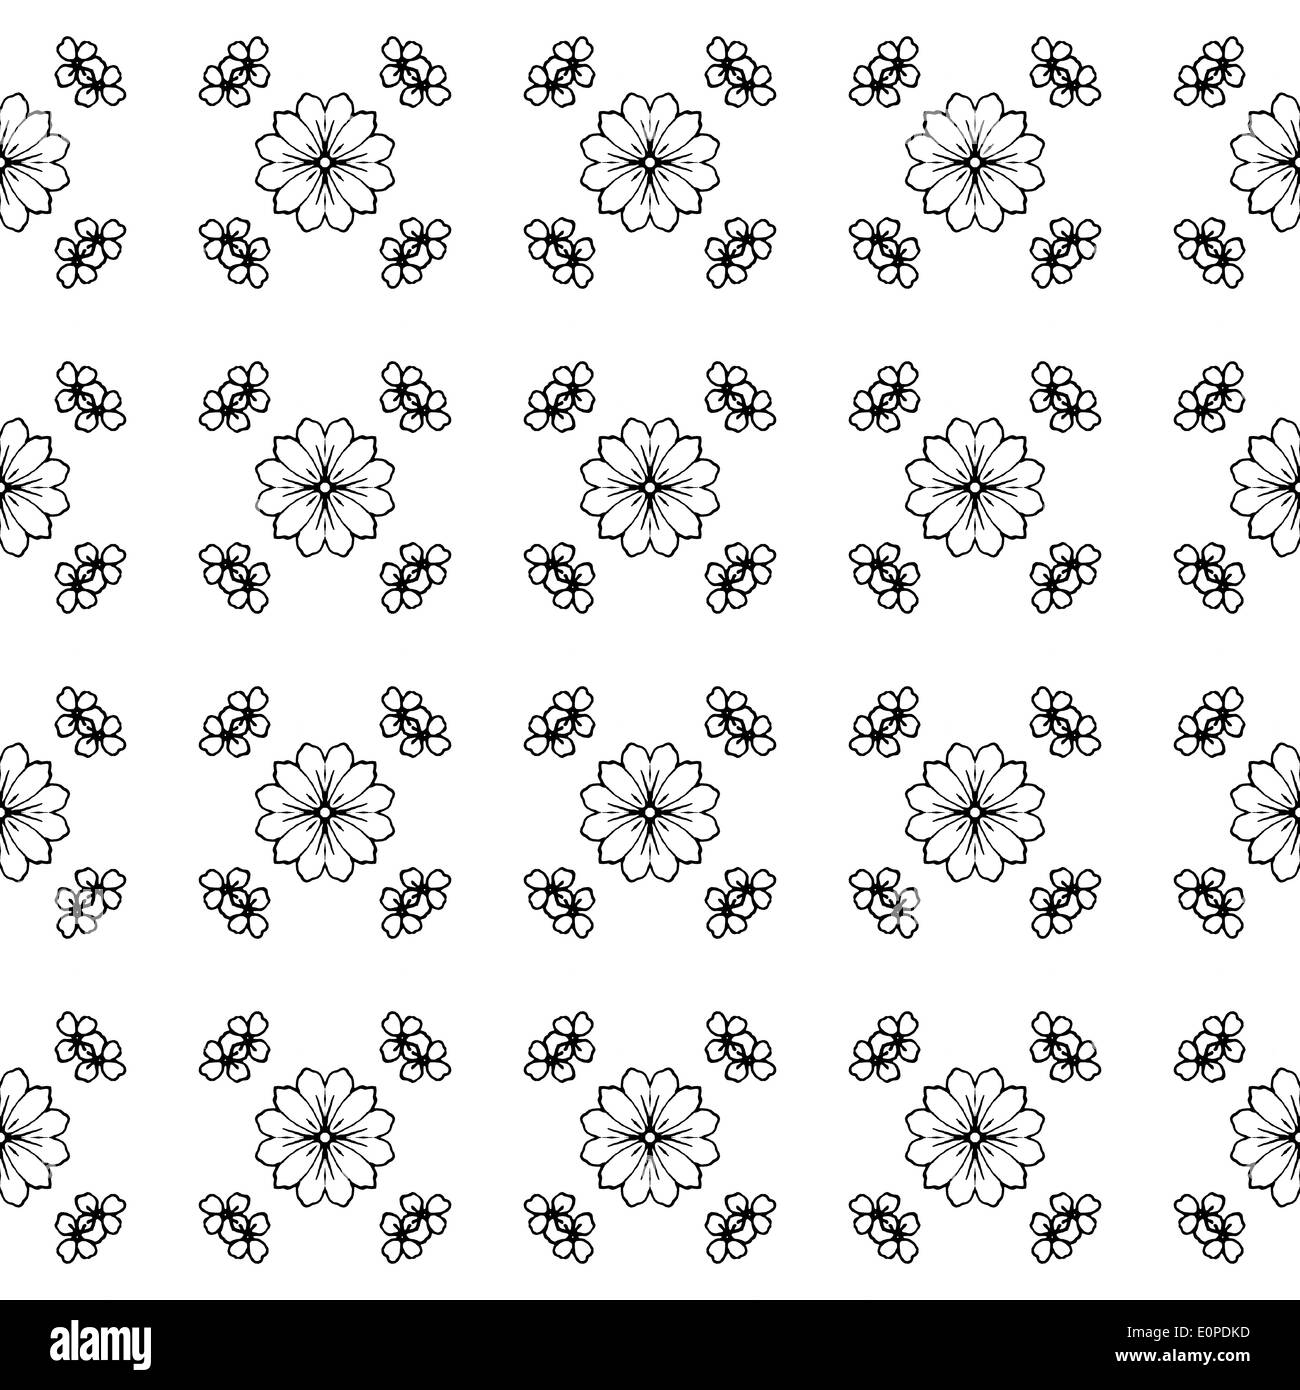 Seamless repetitive floral pattern isolated over white Stock Photo